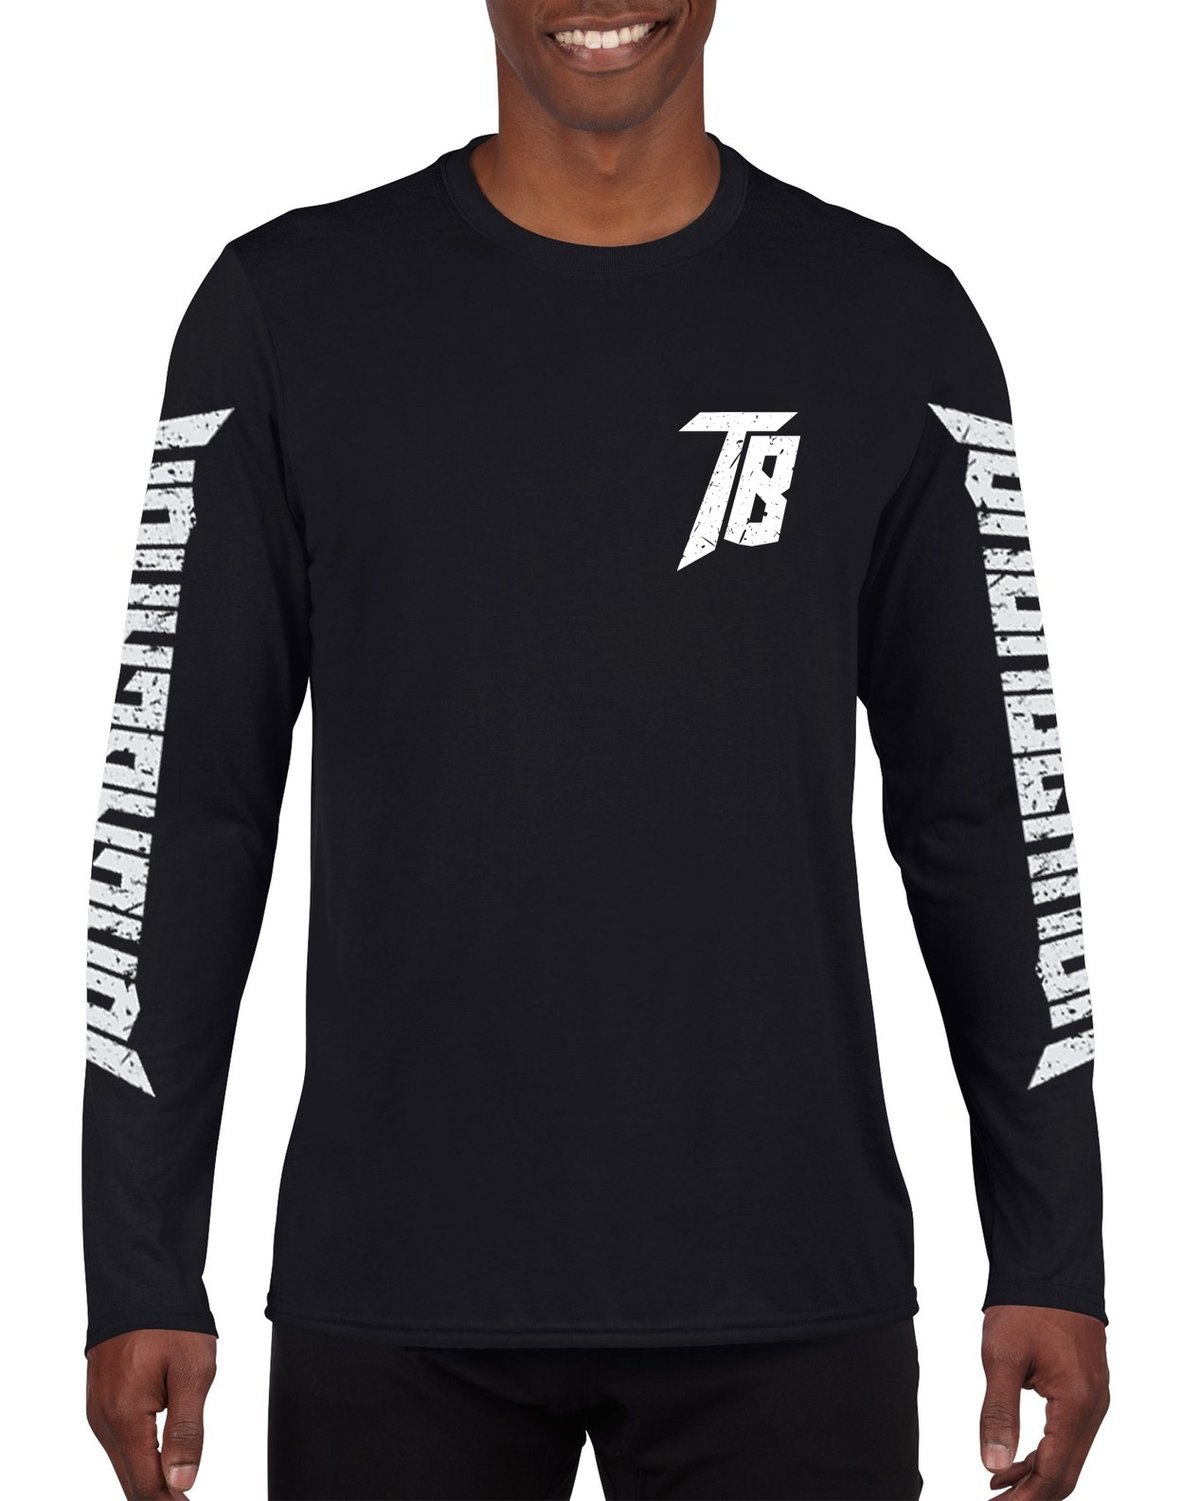 Image of TB Long Sleeved